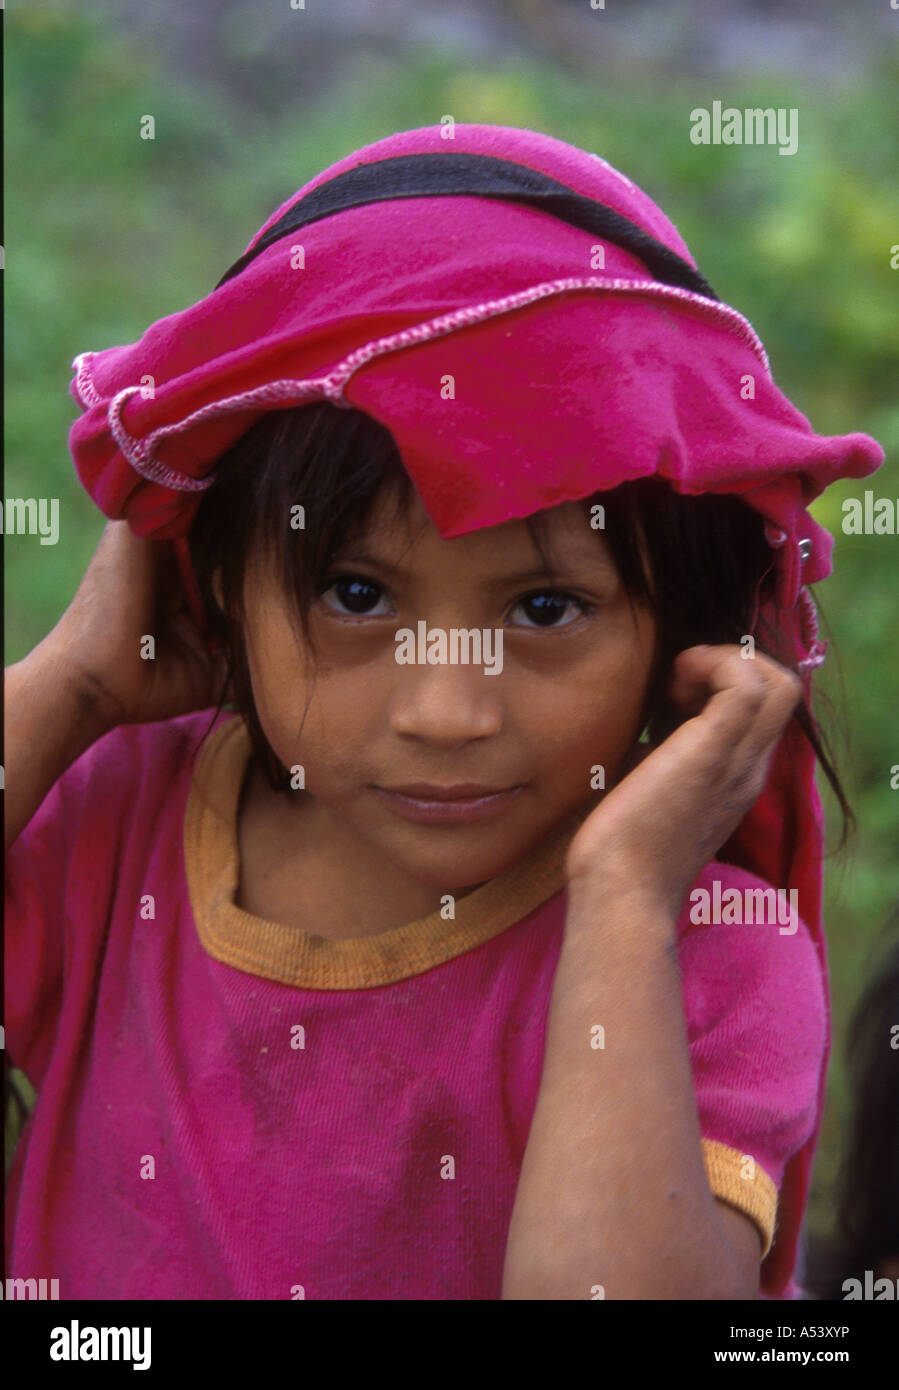 Painet ha2299 5121 guatemala children girl trionfo displaced persons camp country developing nation less economically Stock Photo